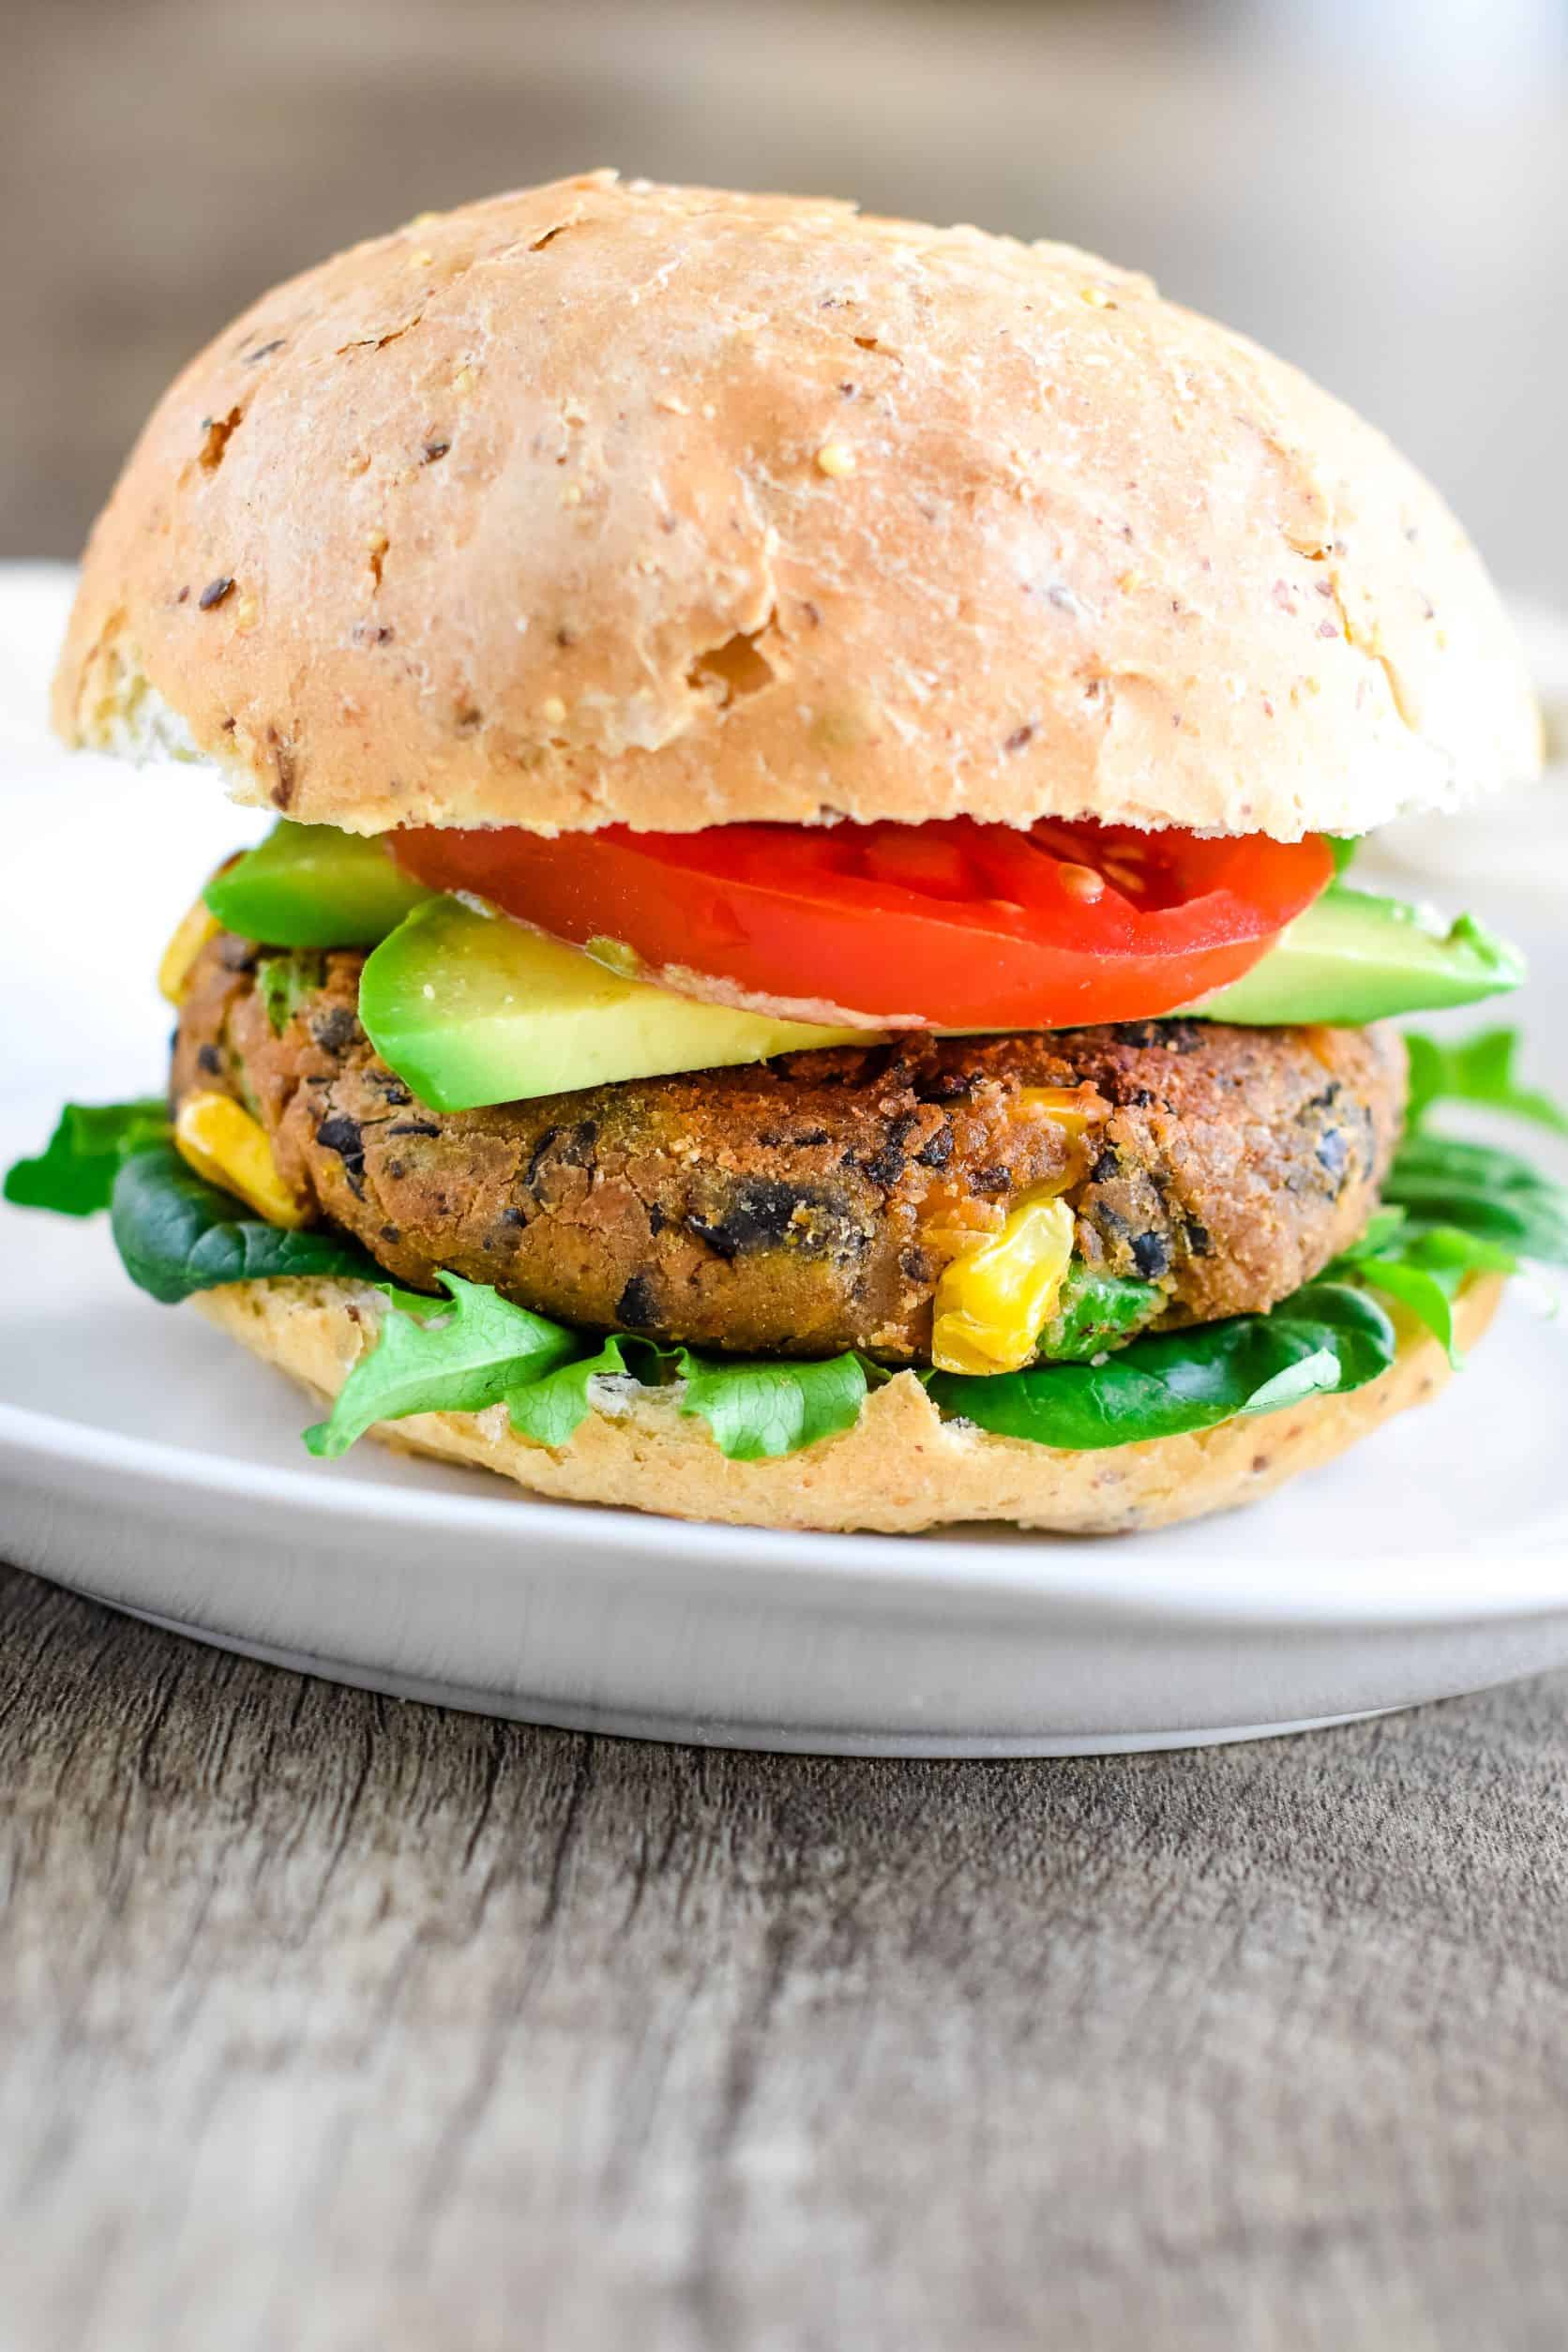 Gluten free burgers recipes round up by eatingworks.com.